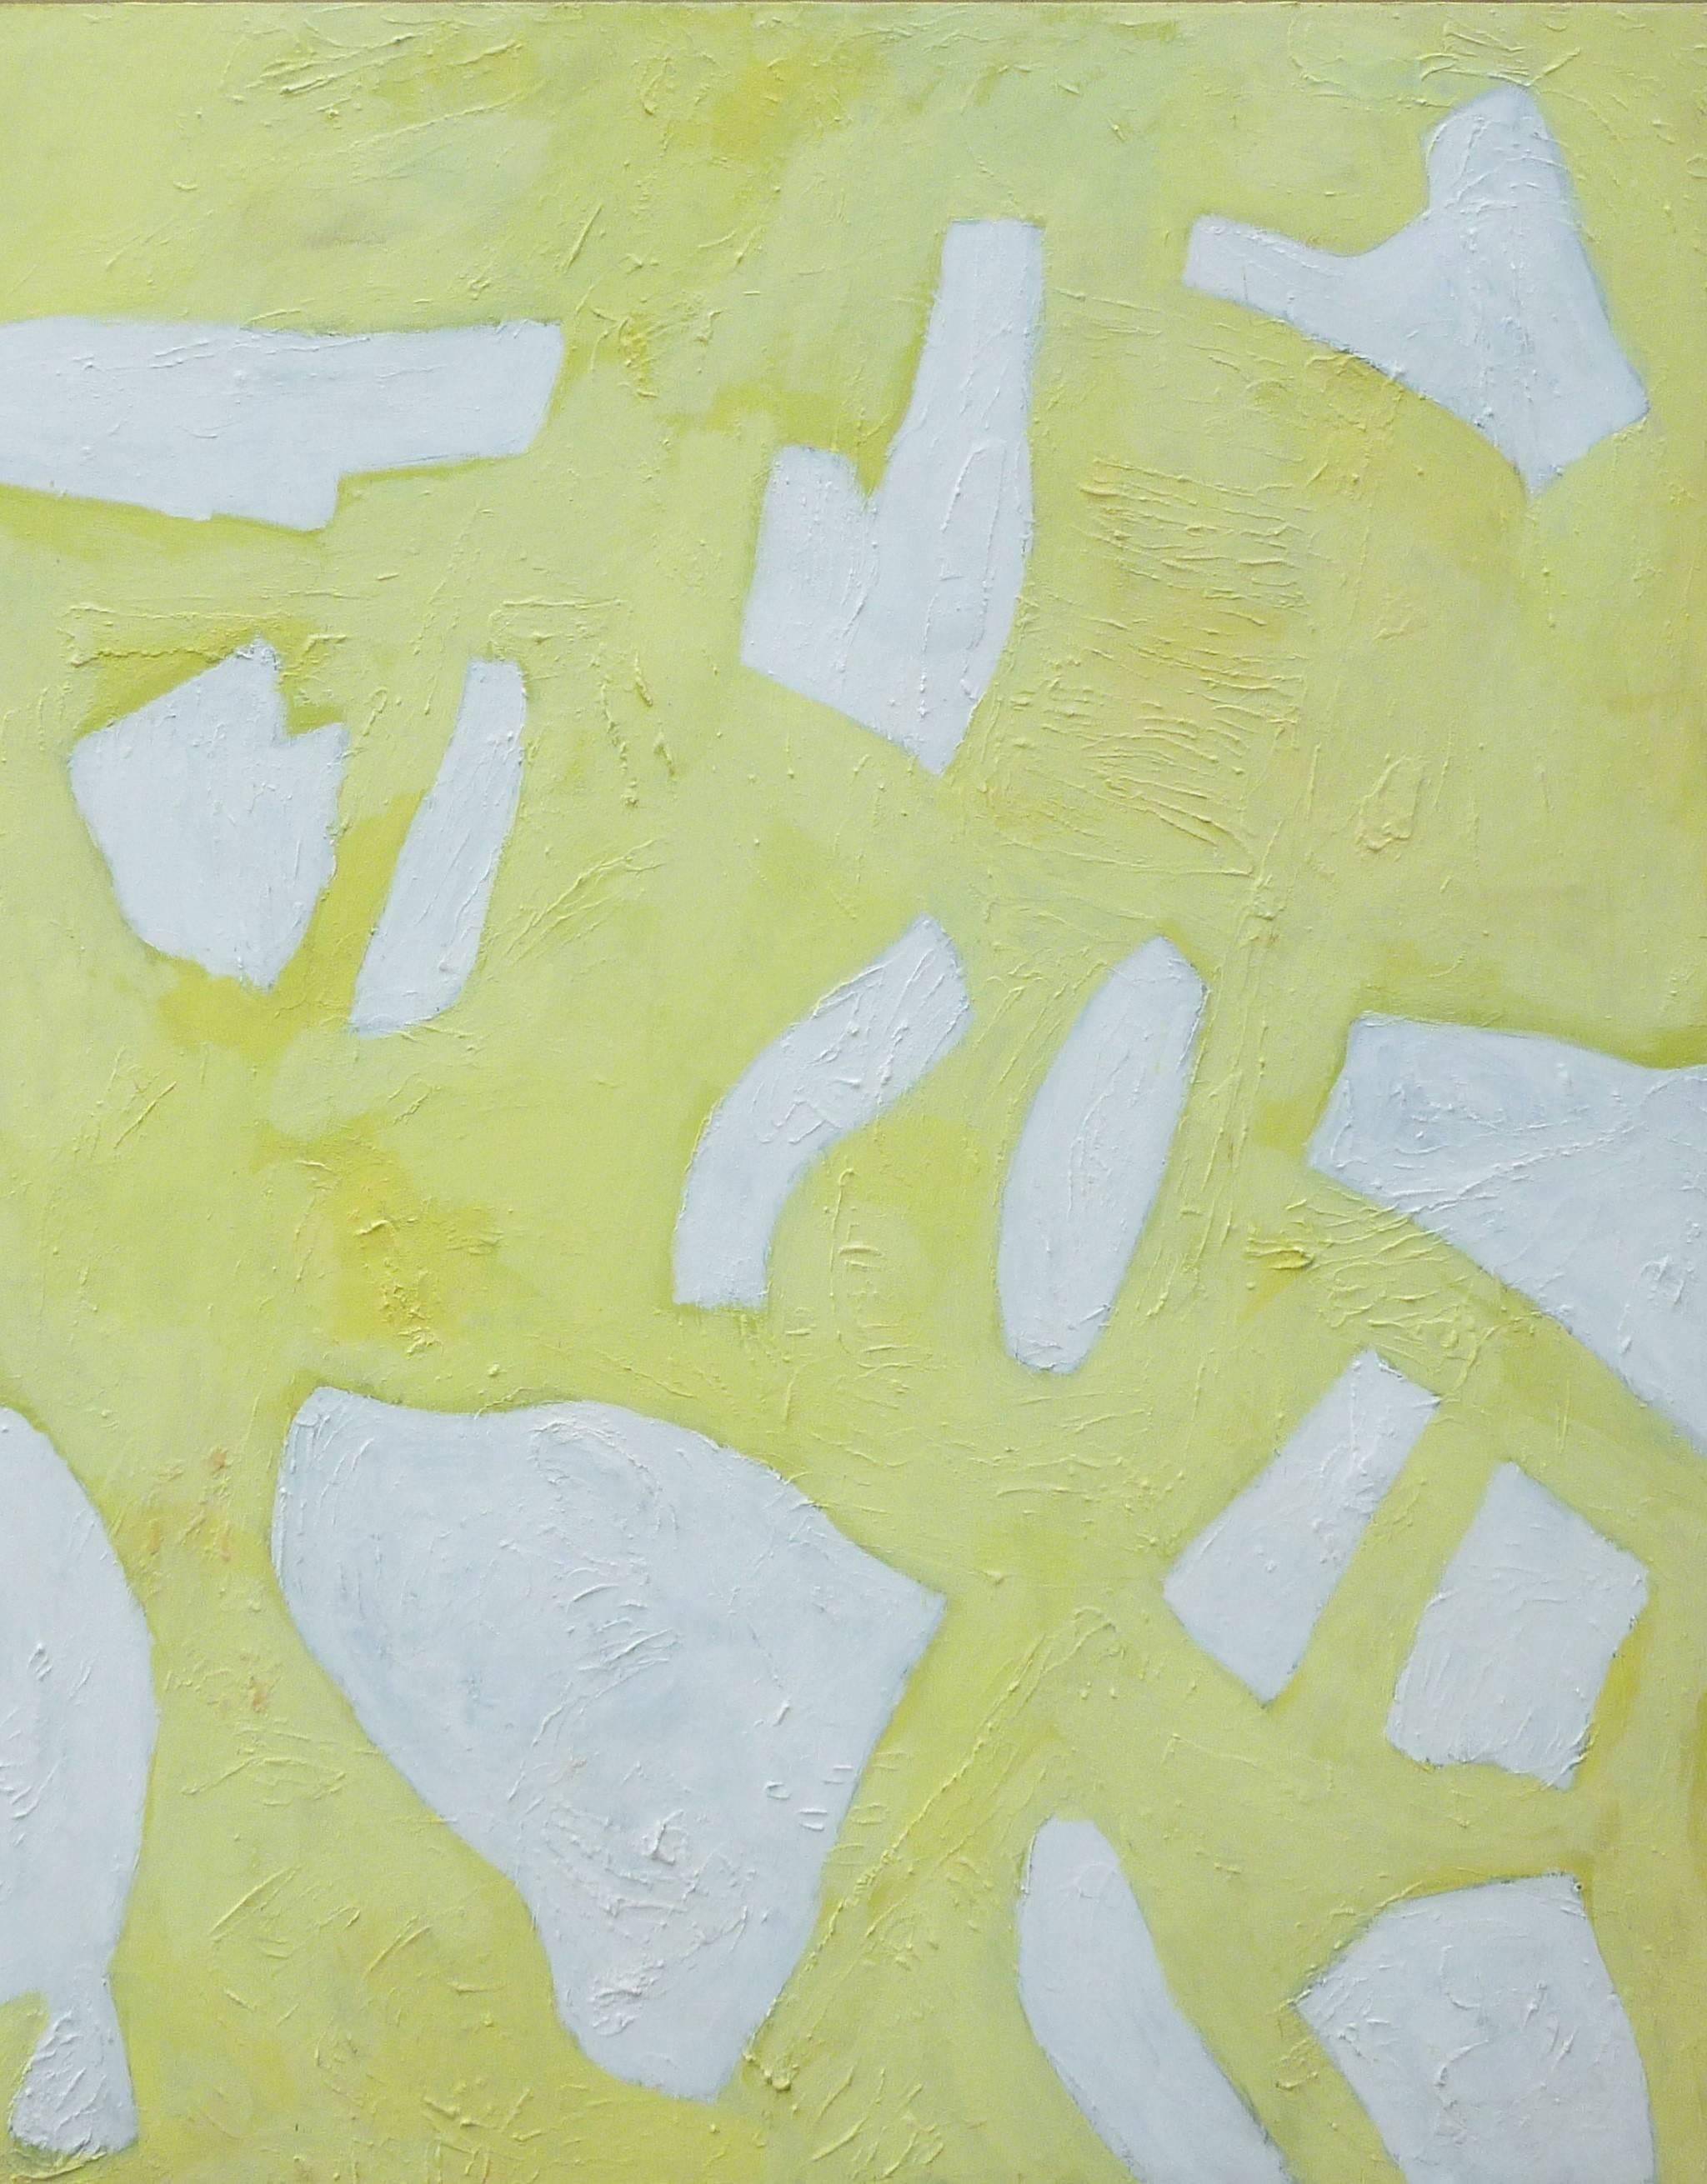 Stephen Brophy Abstract Painting - Light Shards (Abstract Acrylic Painting on Panel in Pale Citron Yellow)